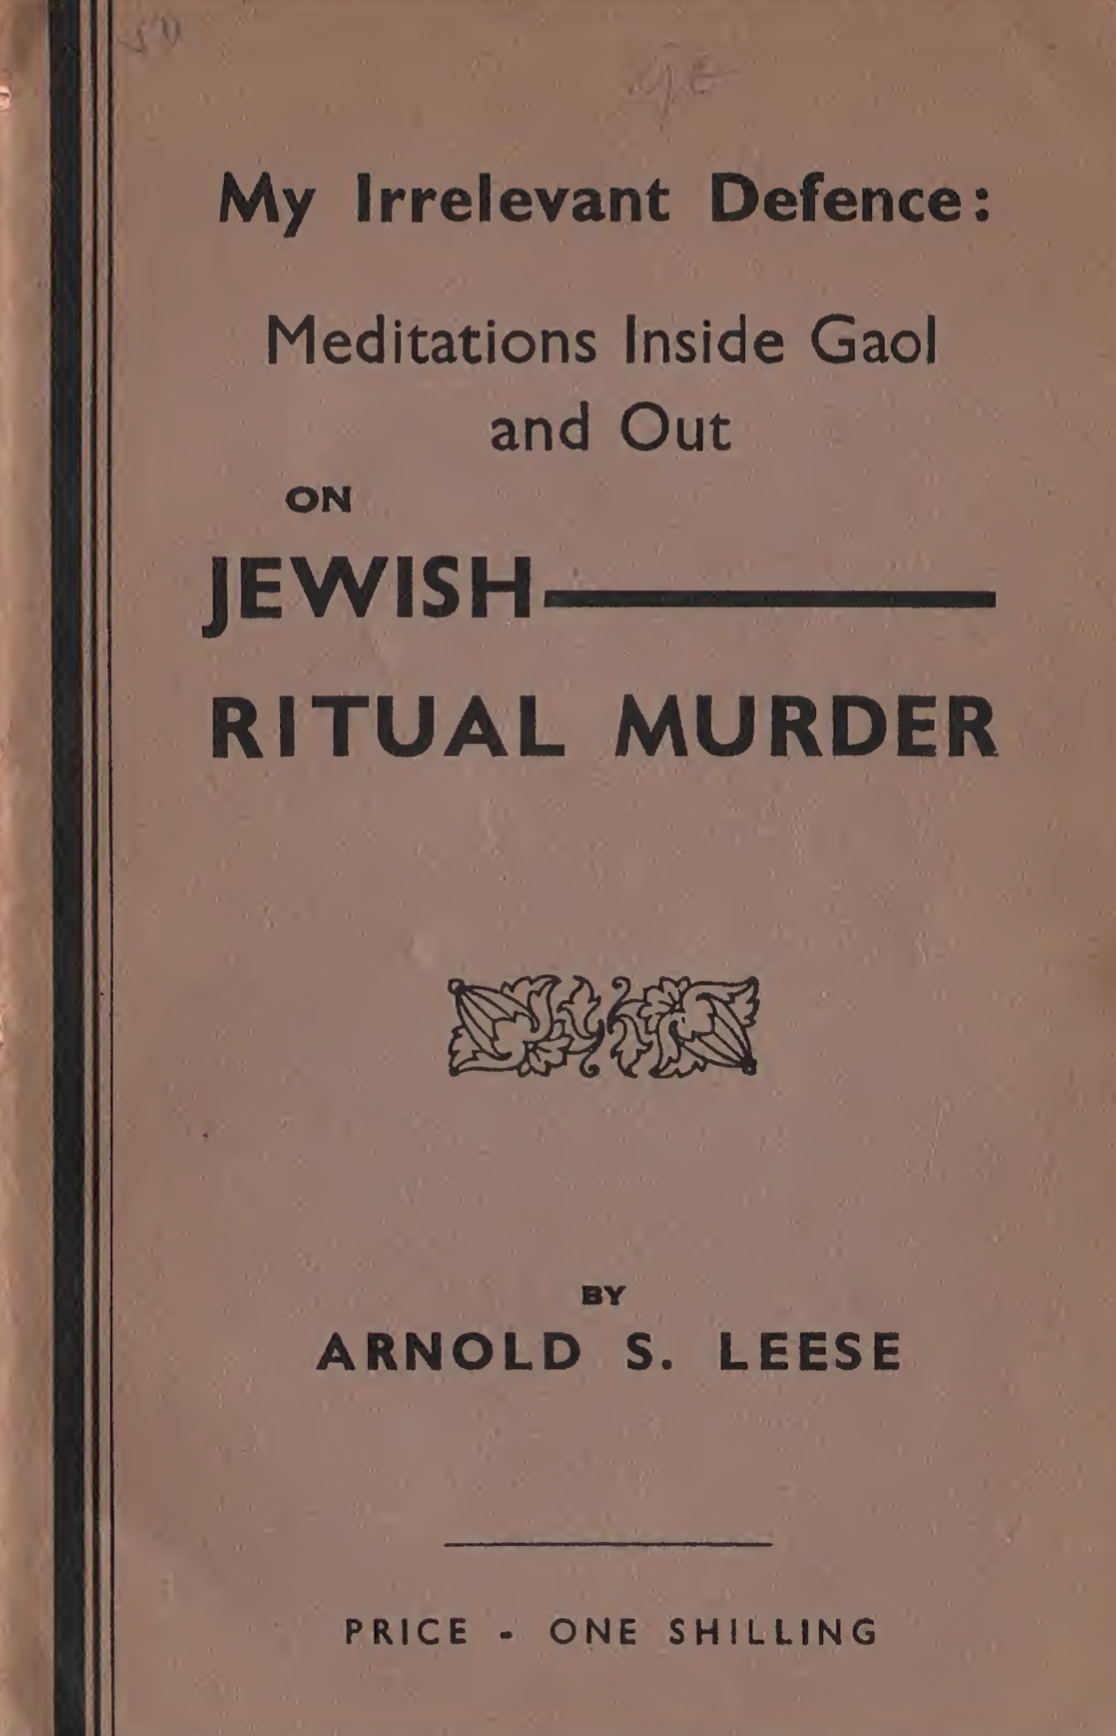 Jewish Ritual Murder My Irrelevant Defence Illustrated (1938) by Arnold Spencer Leese